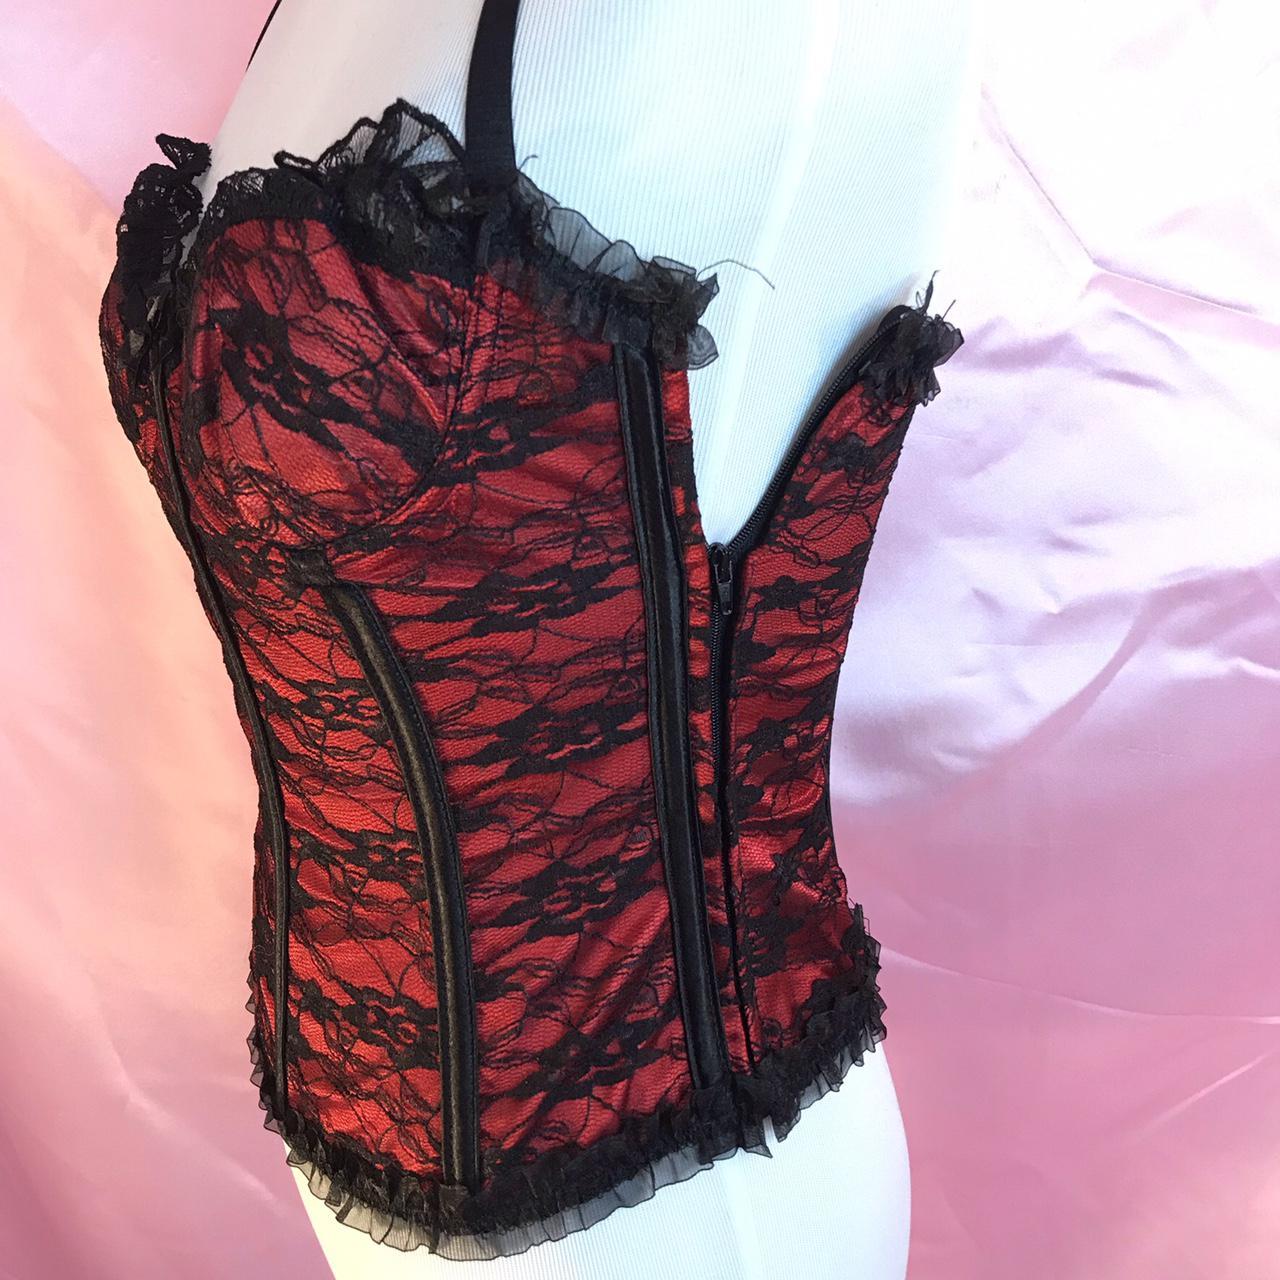 Elegant Moments Women's Black and Red Corset (2)